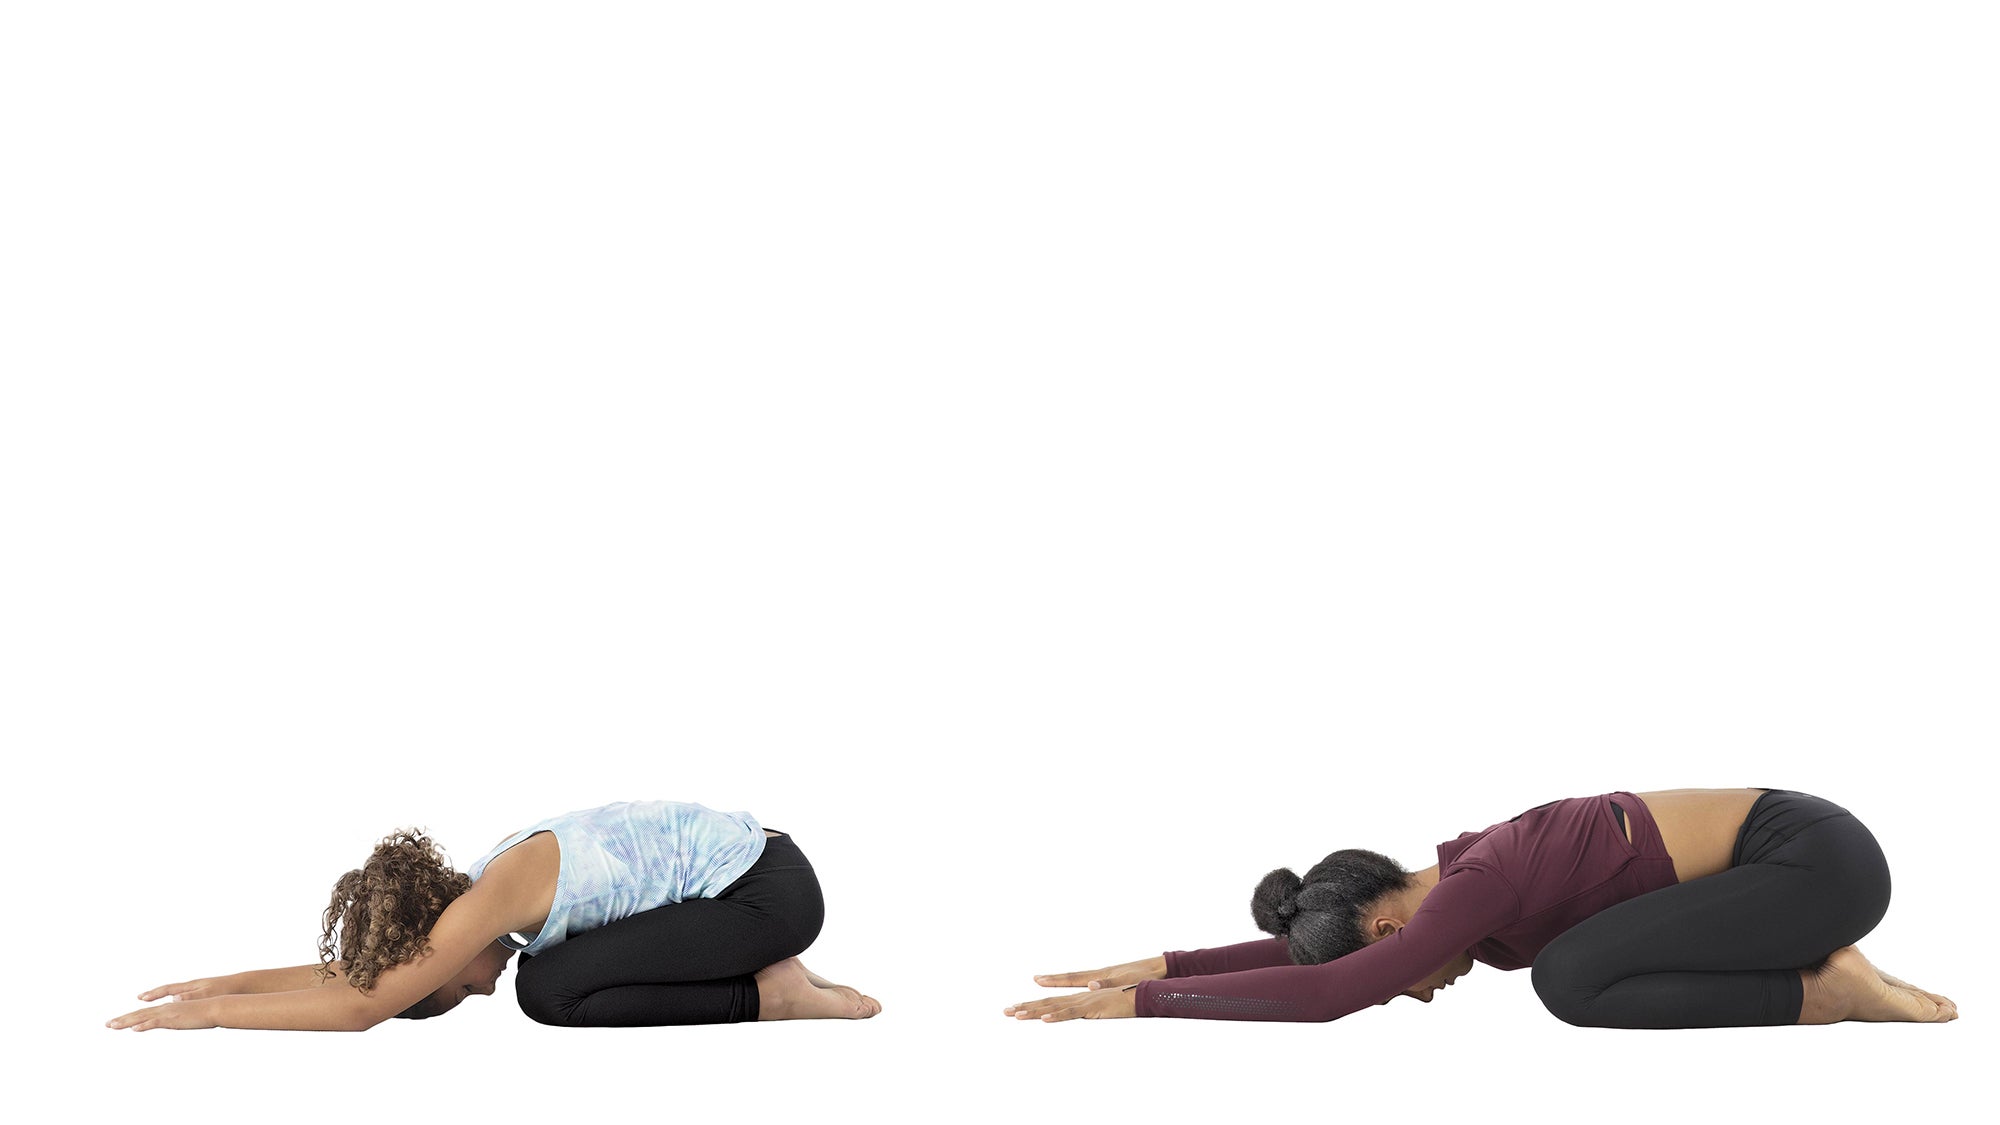 Why Is Child's Pose So Insanely Calming? - Yoga Journal